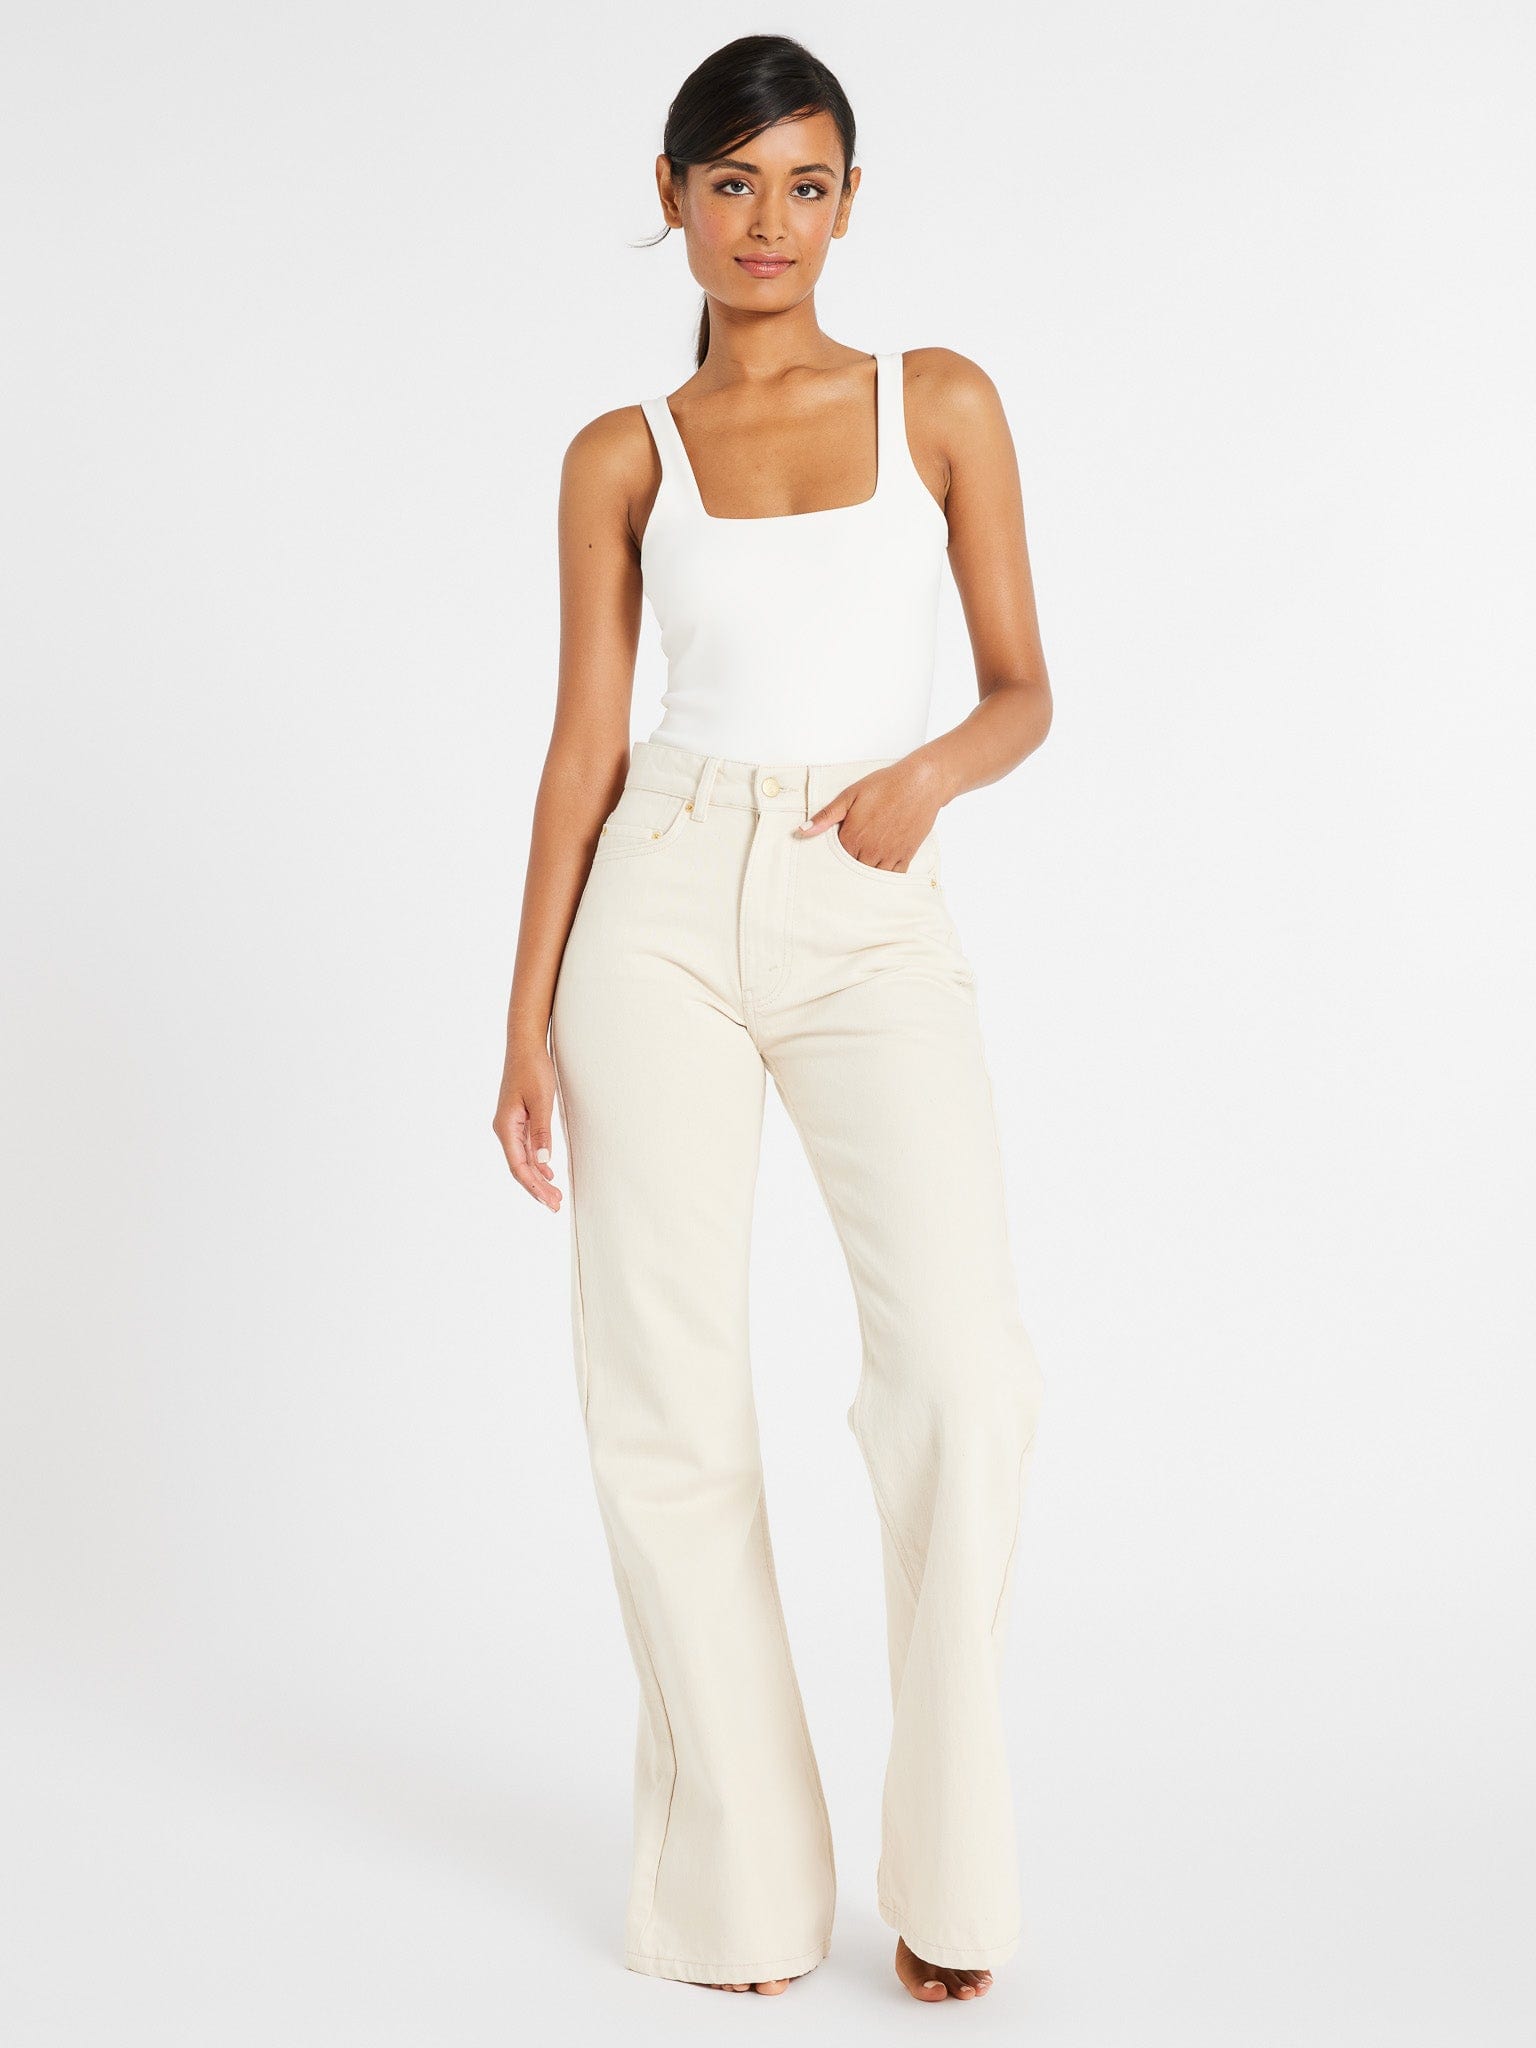 White Eyelet Top and White Flare Jeans  White flared jeans, Flare jeans, White  flare jeans outfit